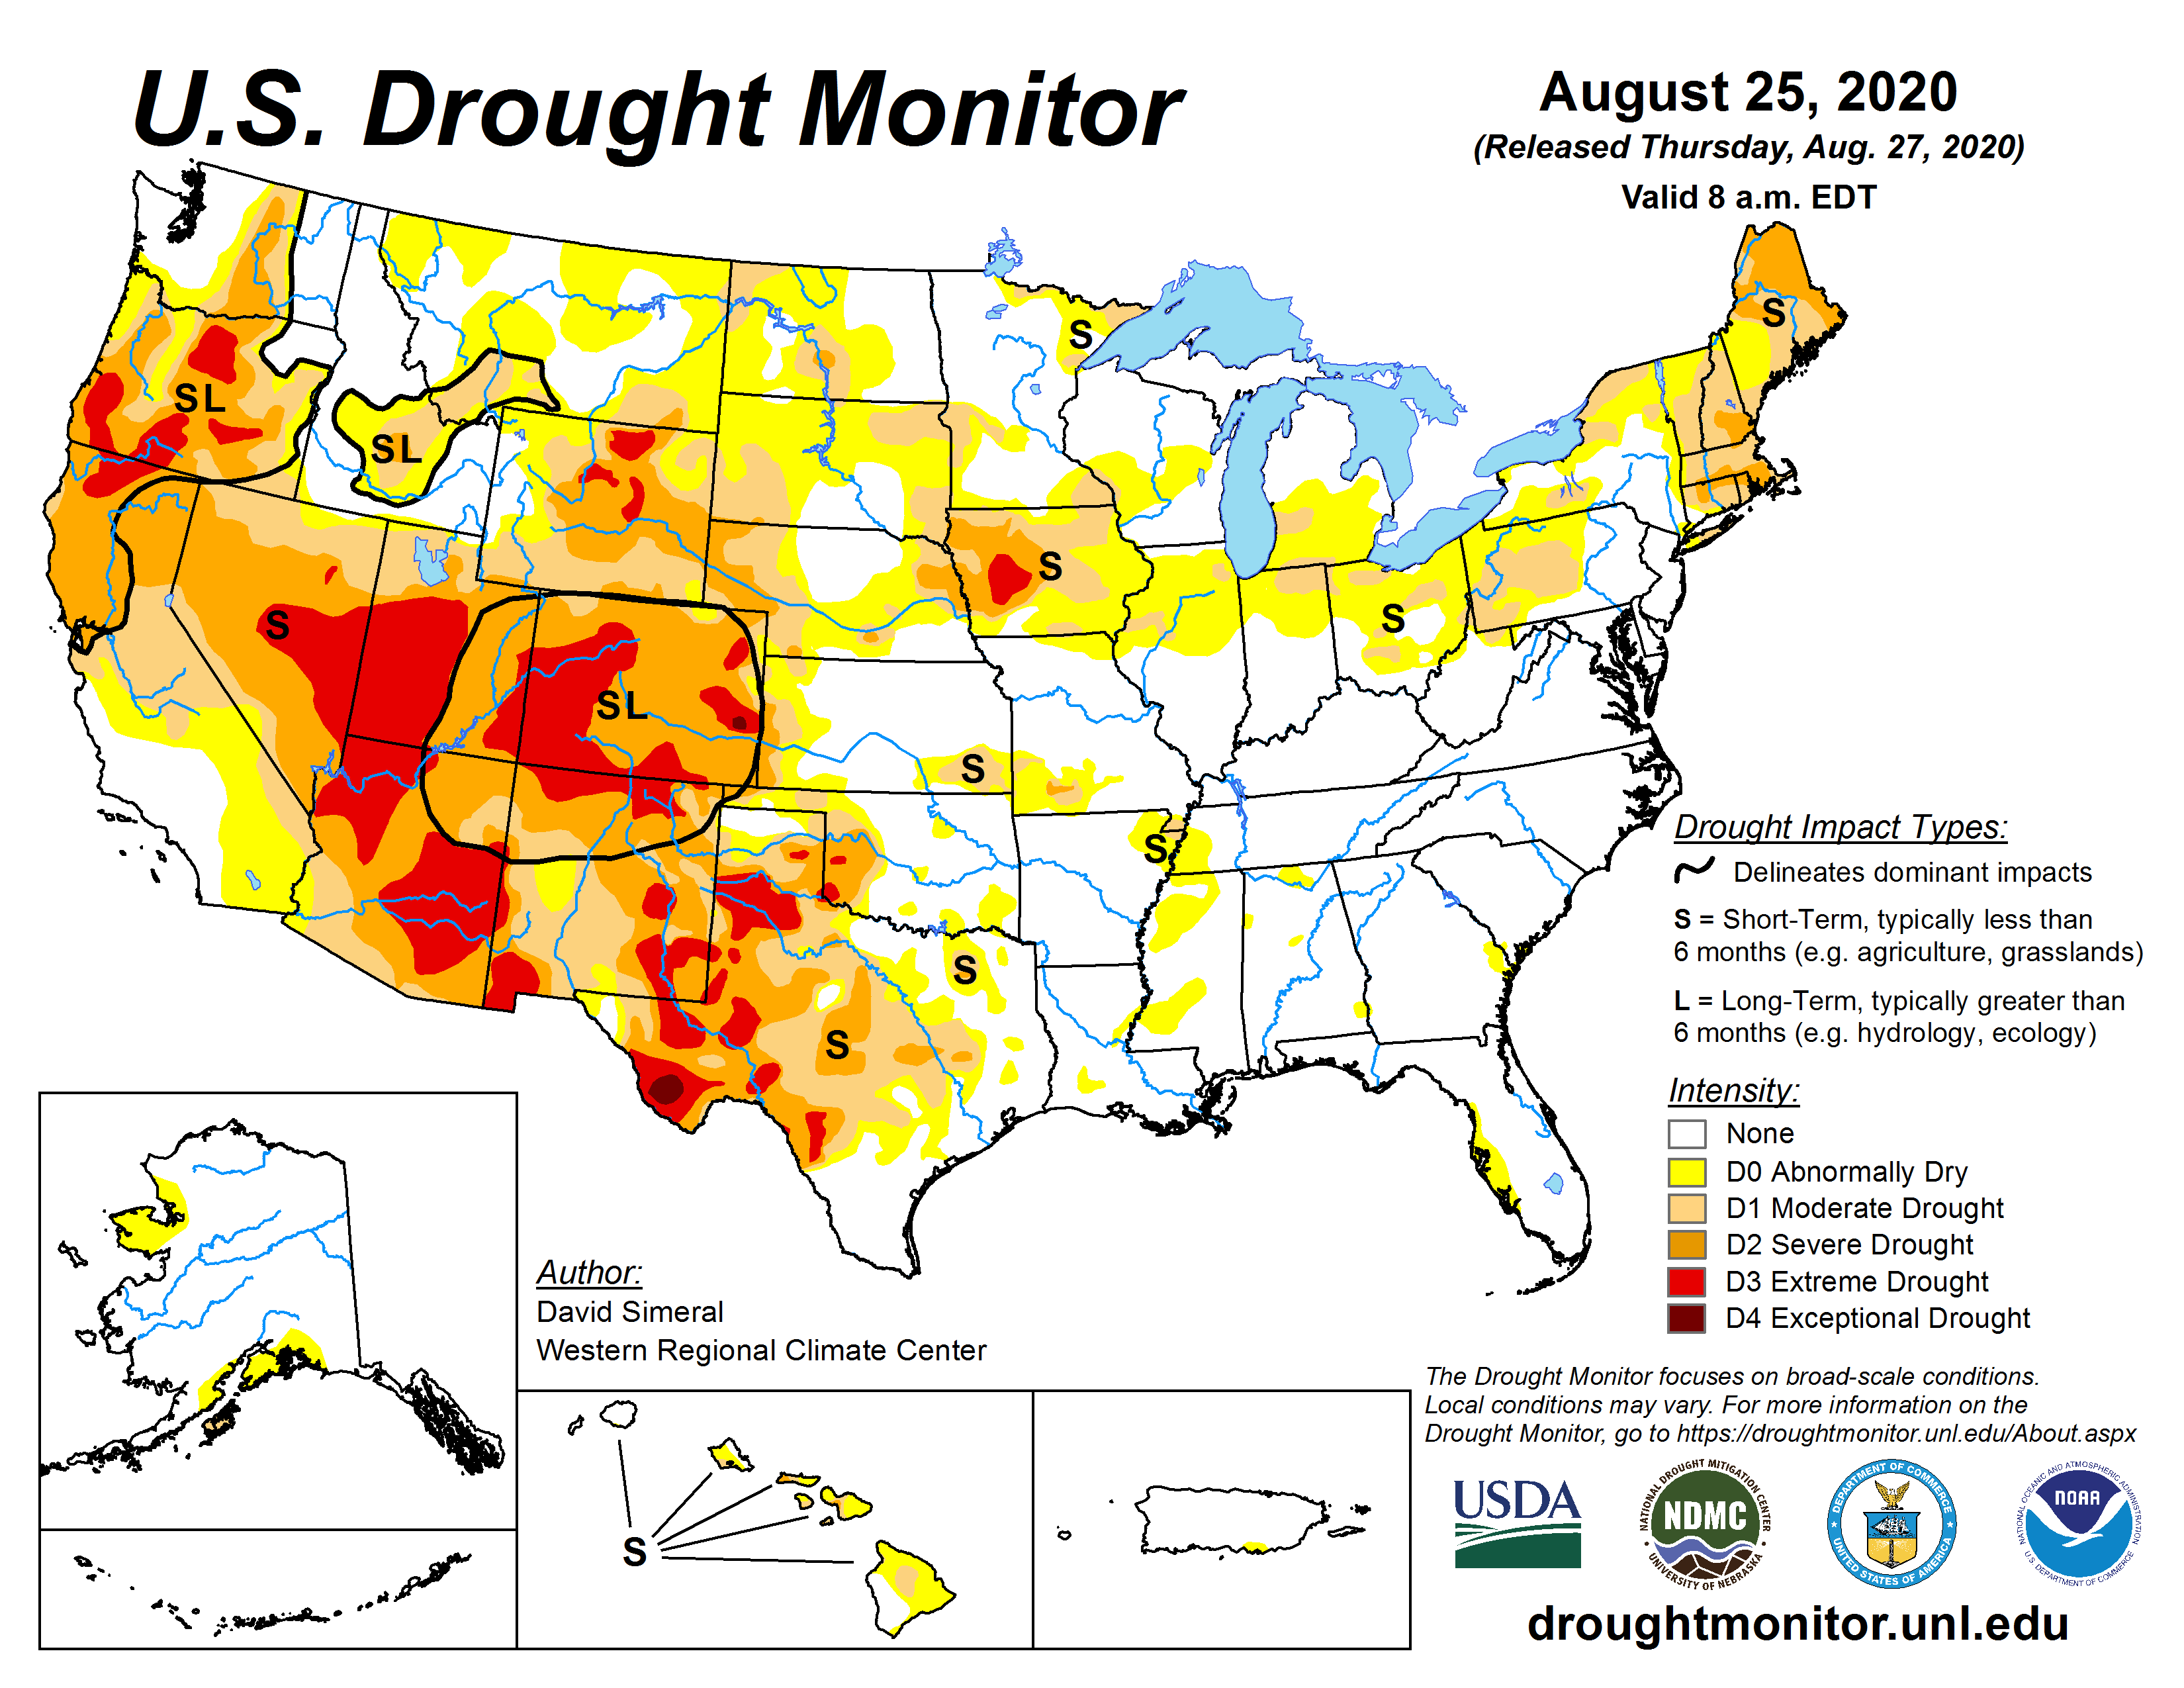 U.S. Drought Monitor map for August 25, 2020